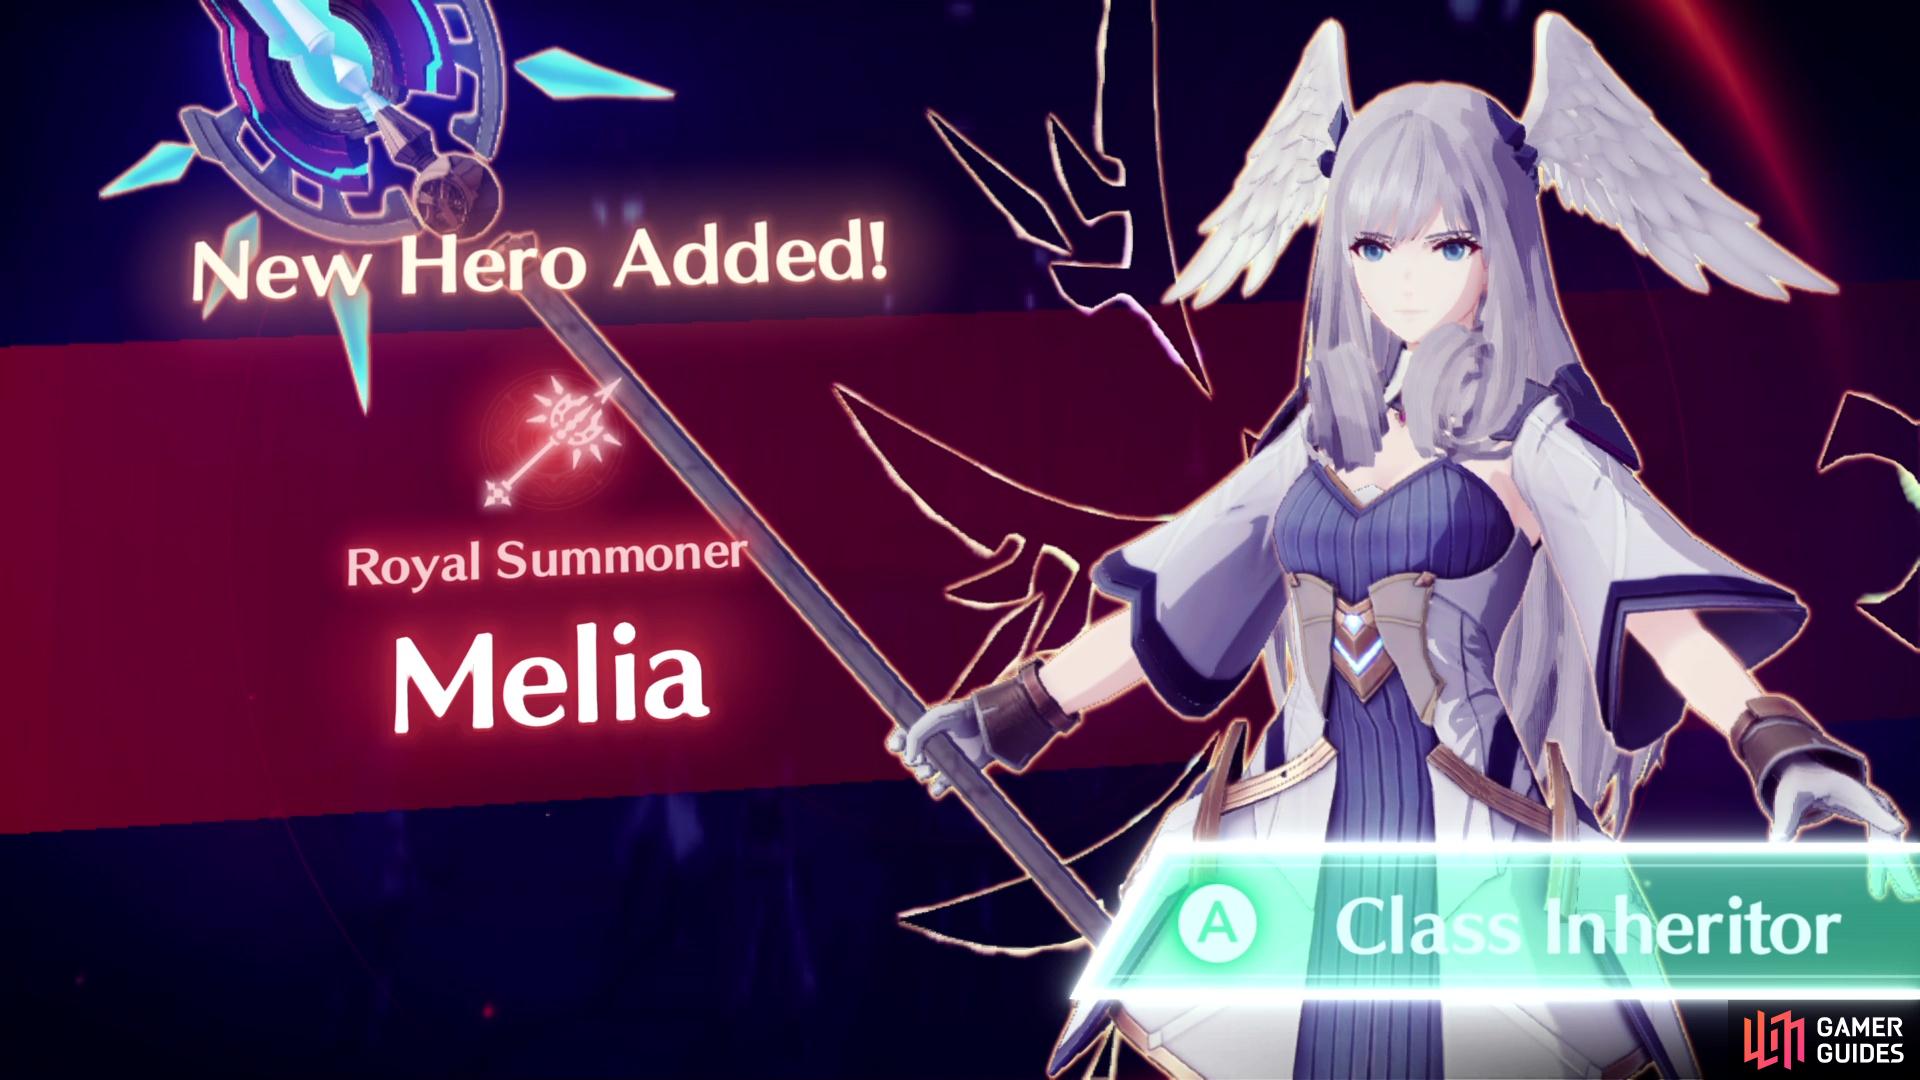 this will unlock Melia and the Royal Summoner Class.